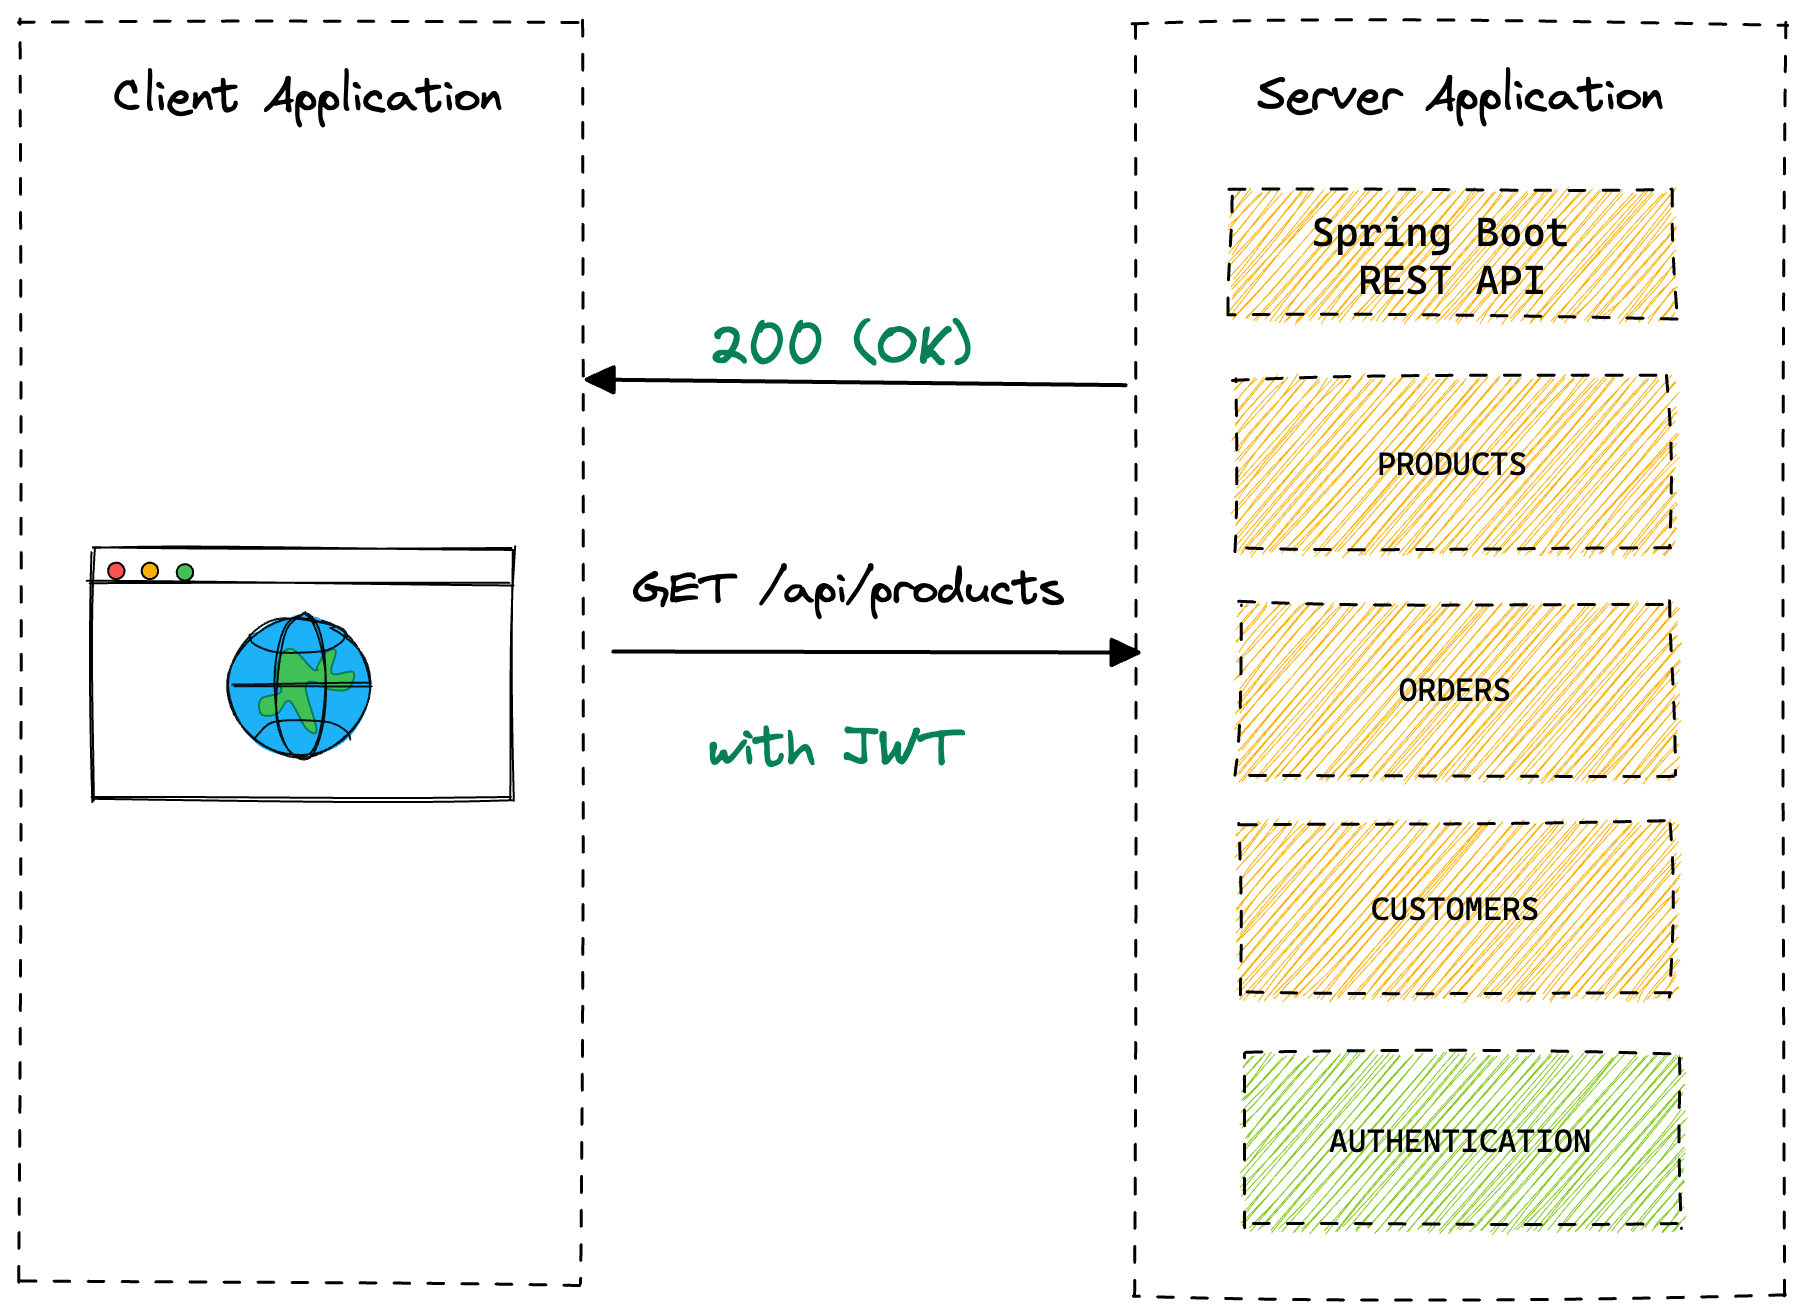 Application Architecture: Request with JSON Web Token (JWT)